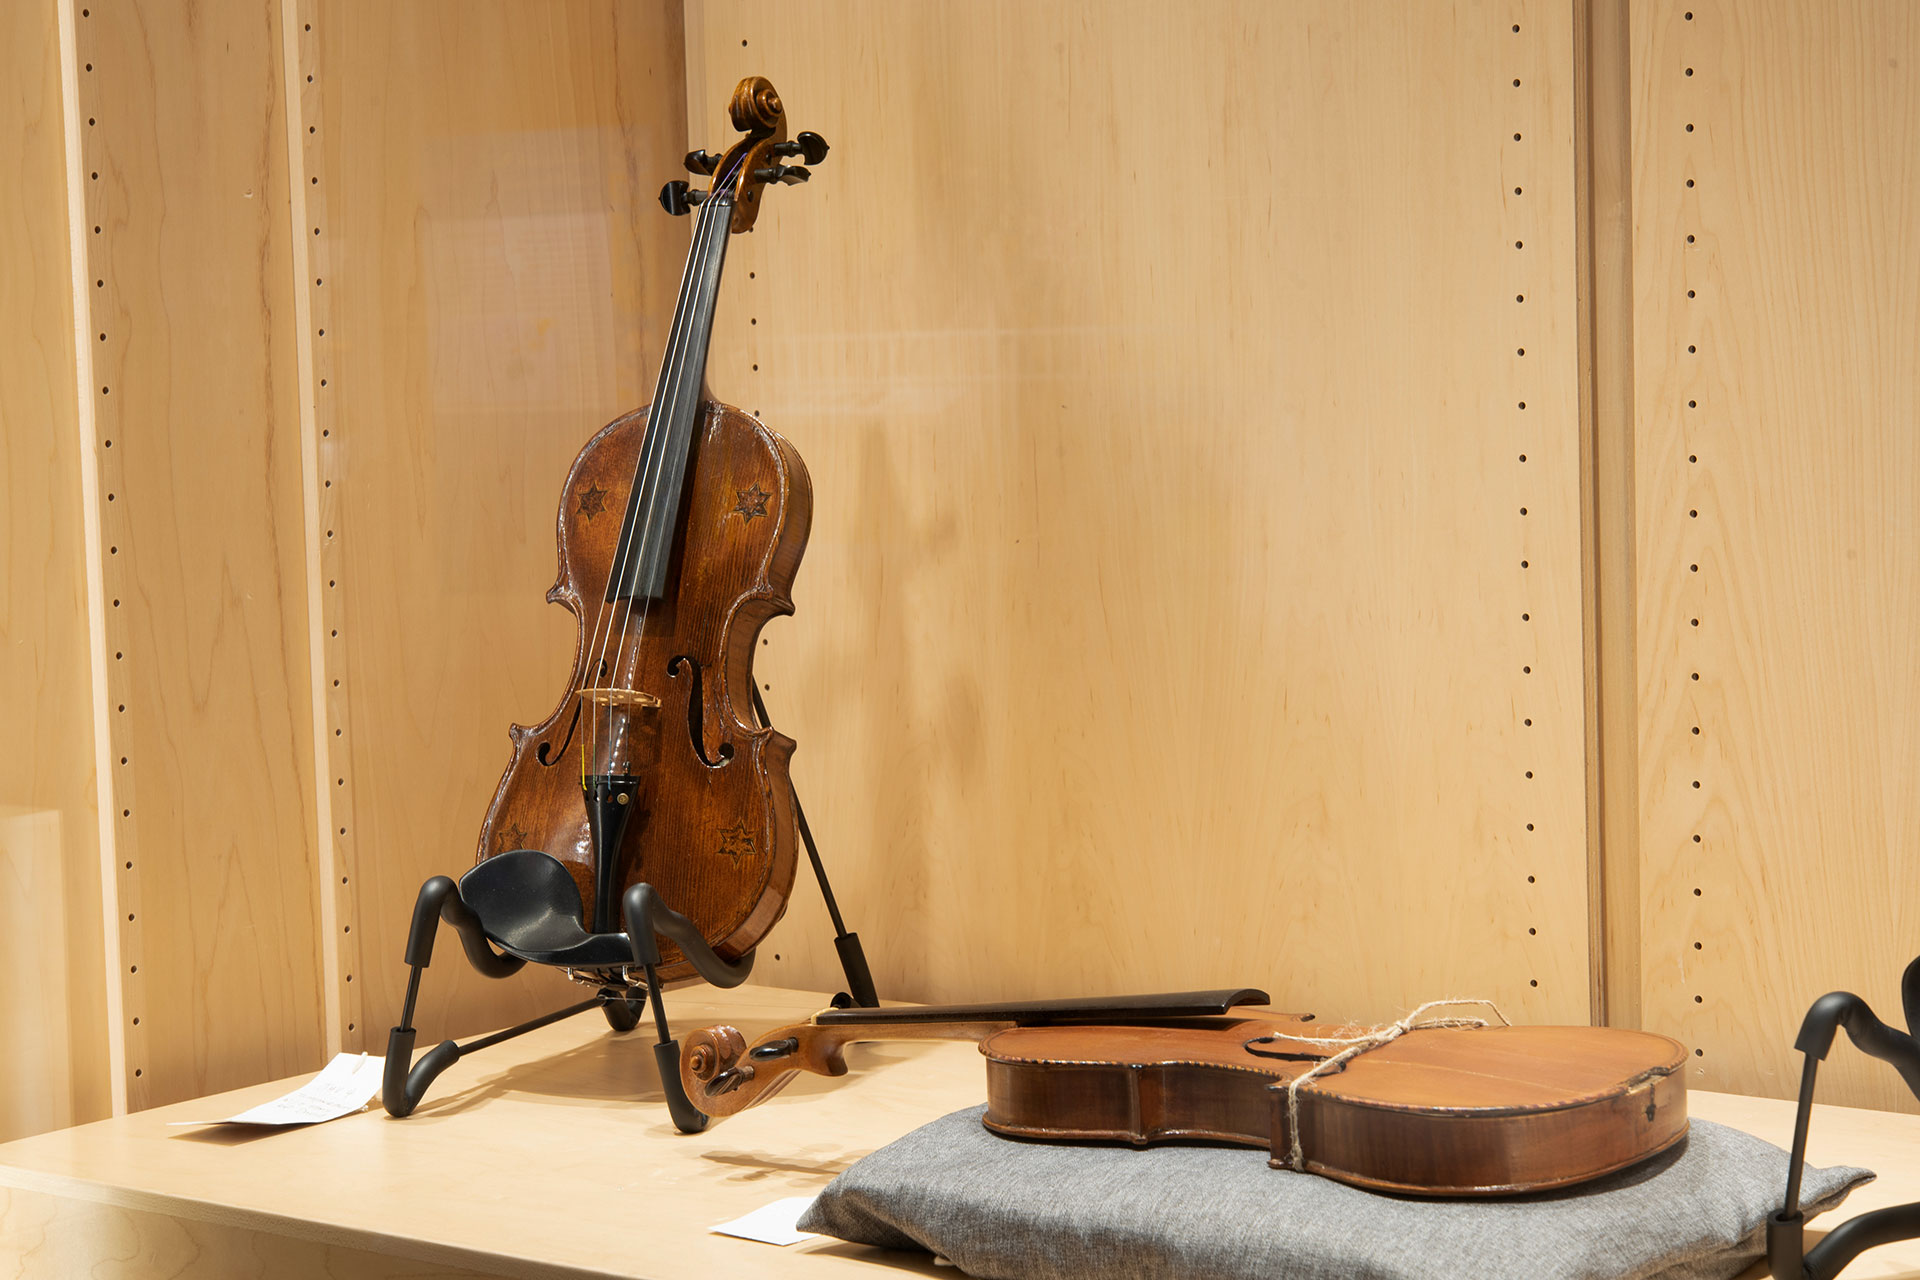 A brown violin displayed vertically on a stanc and a light brown violin displayed horizontally